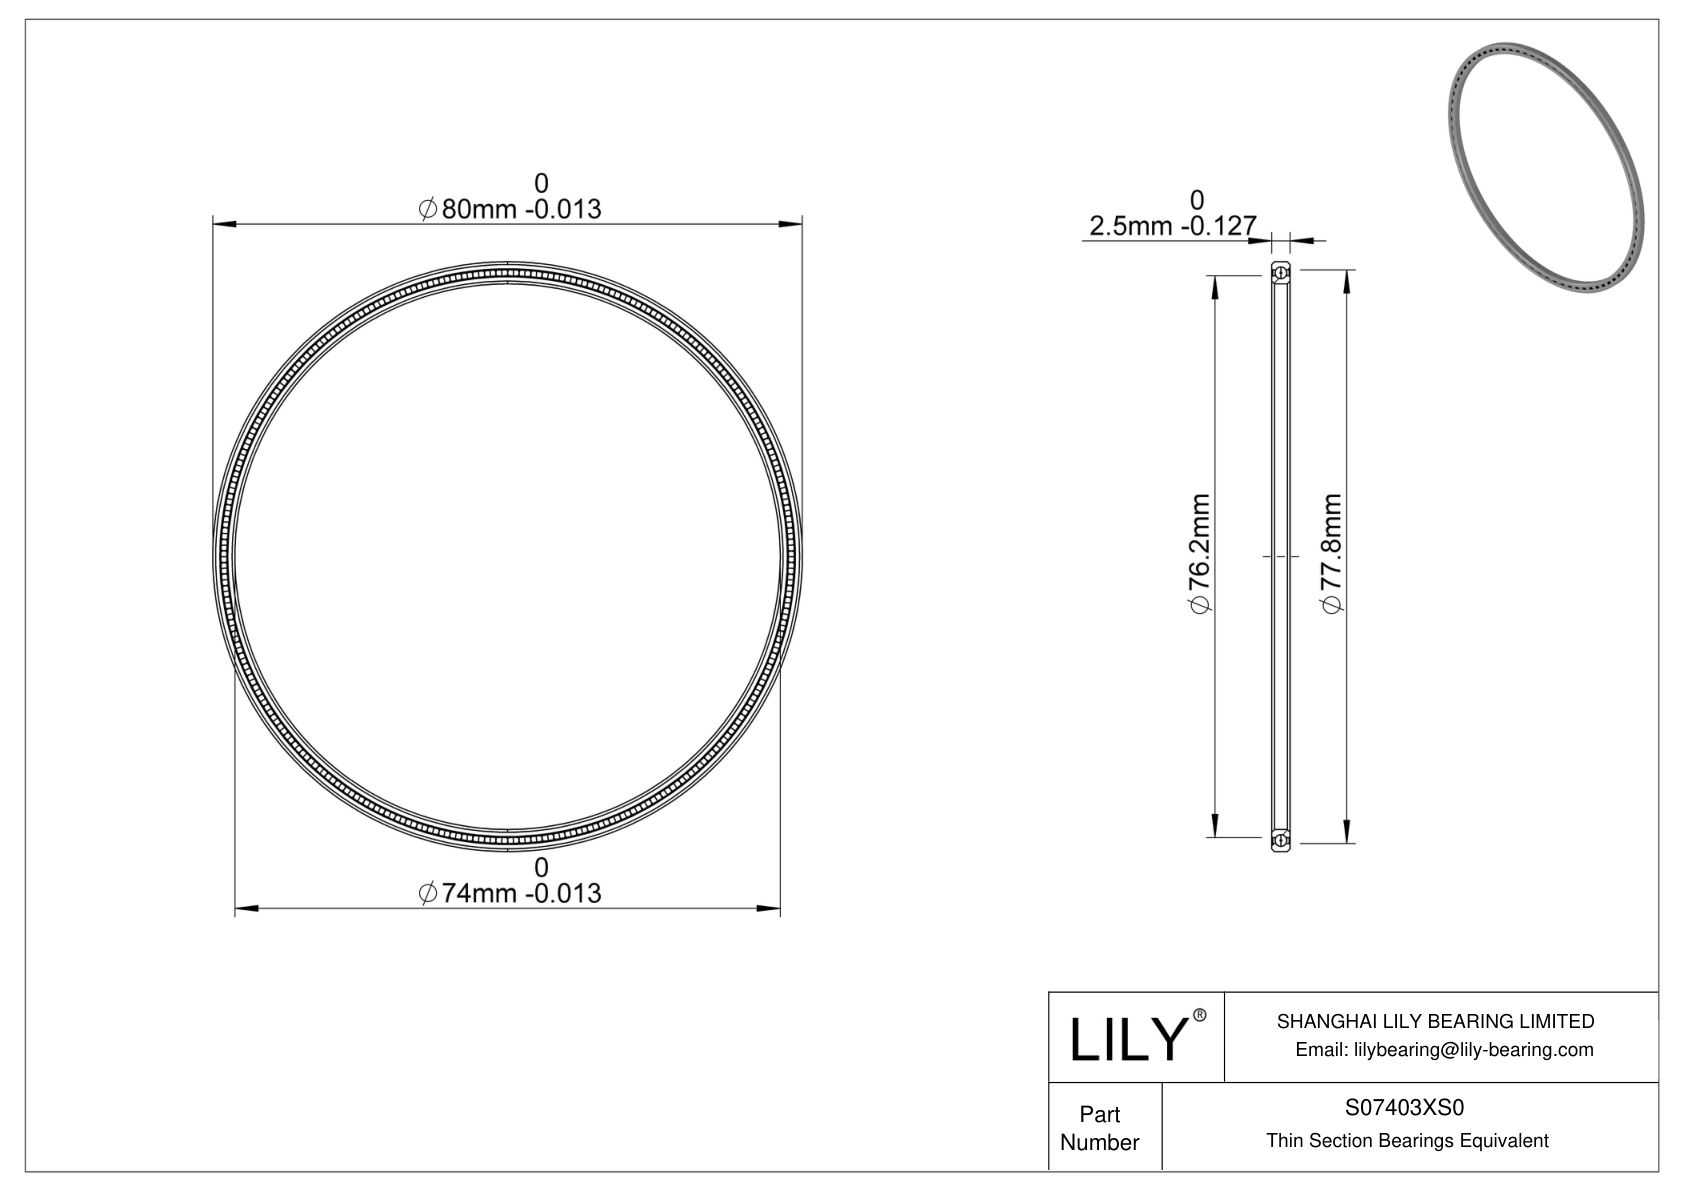 S07403XS0 Constant Section (CS) Bearings cad drawing